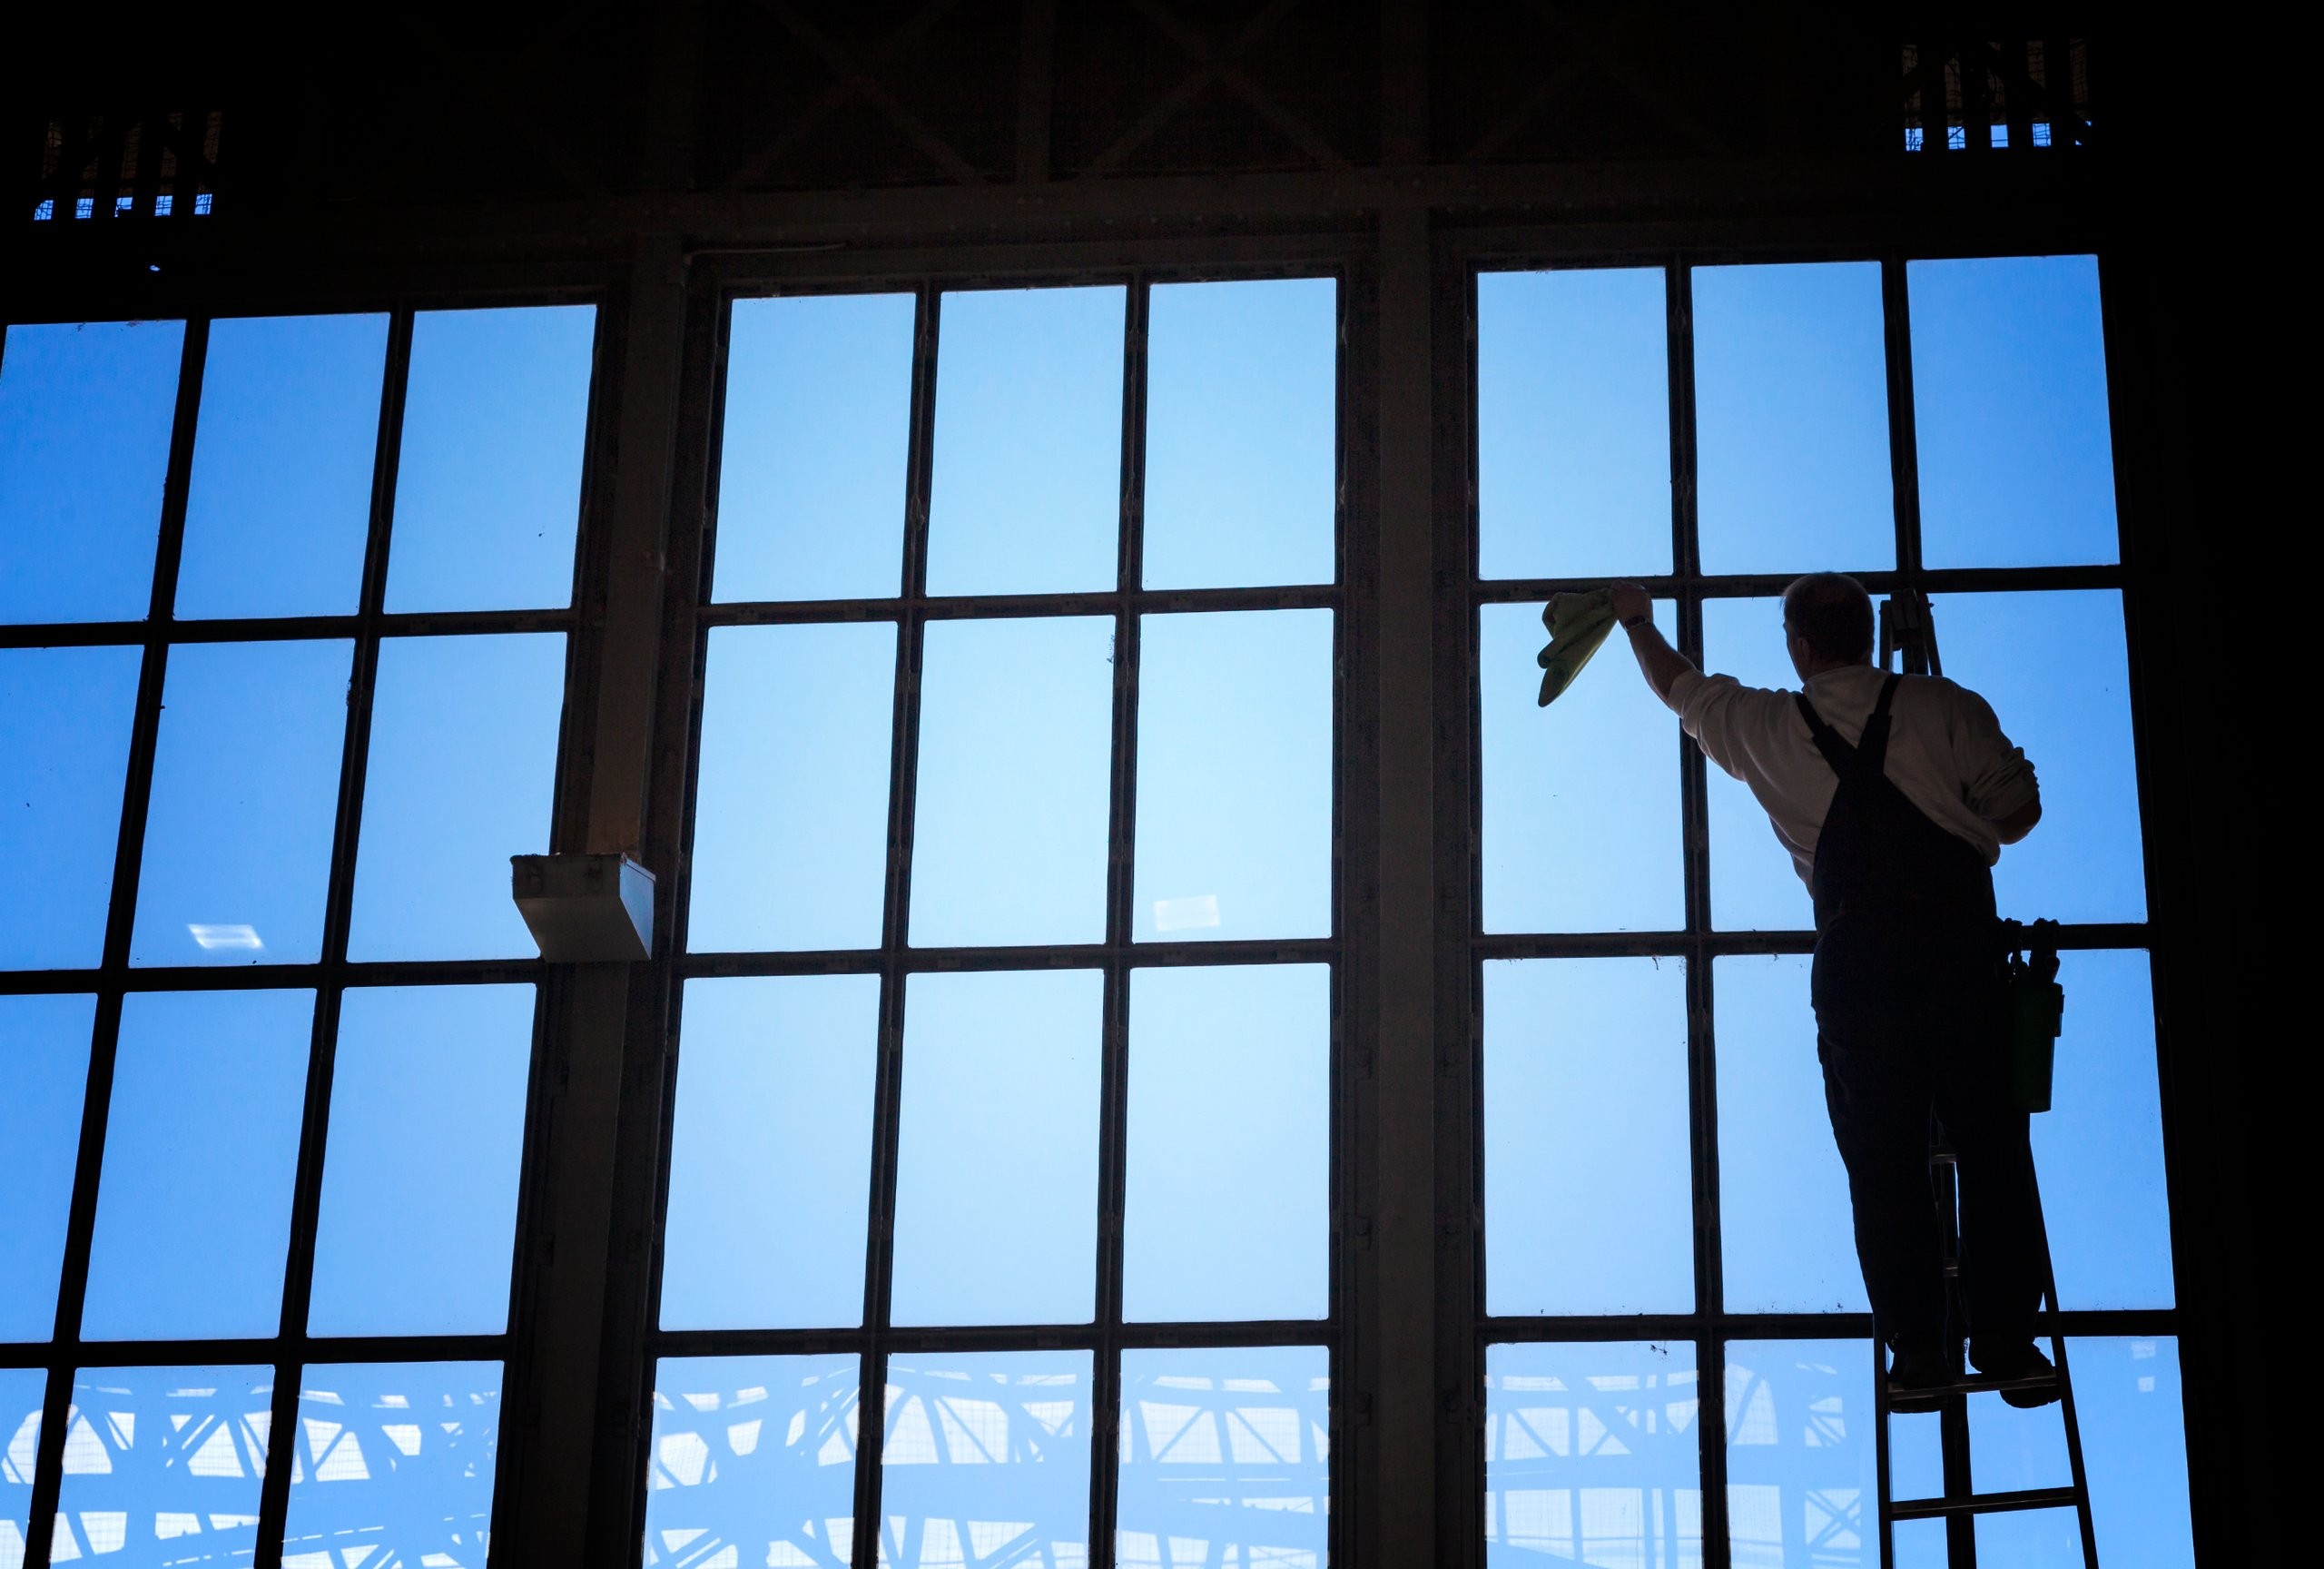 7 facts you want to know about washing windows in New York